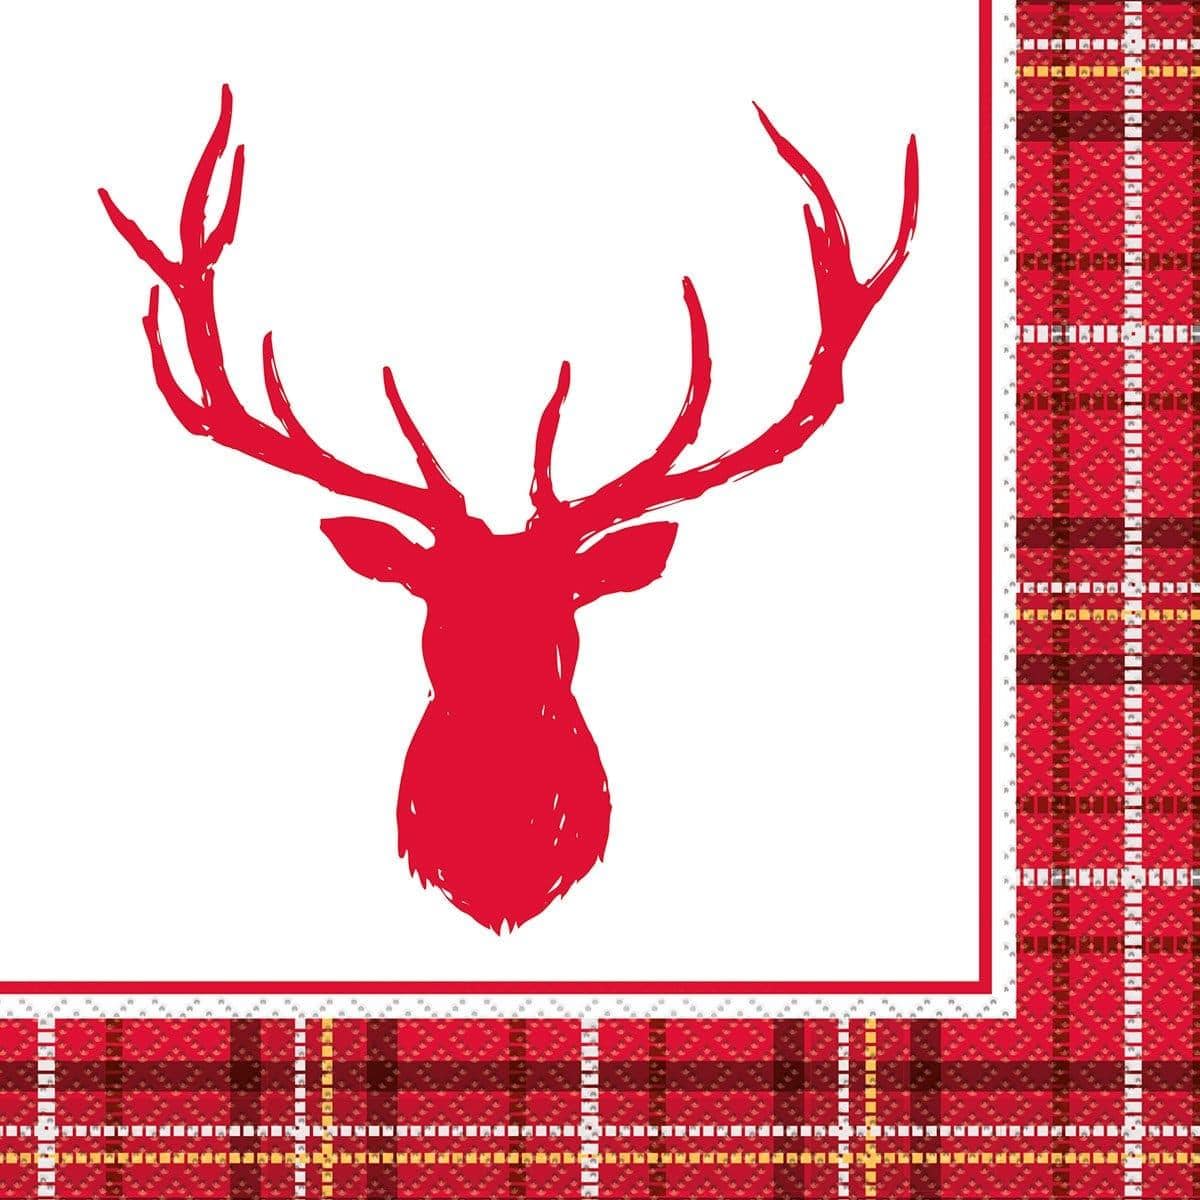 Buy Christmas Plaid Deer - Lunch Napkins 16/pkg sold at Party Expert